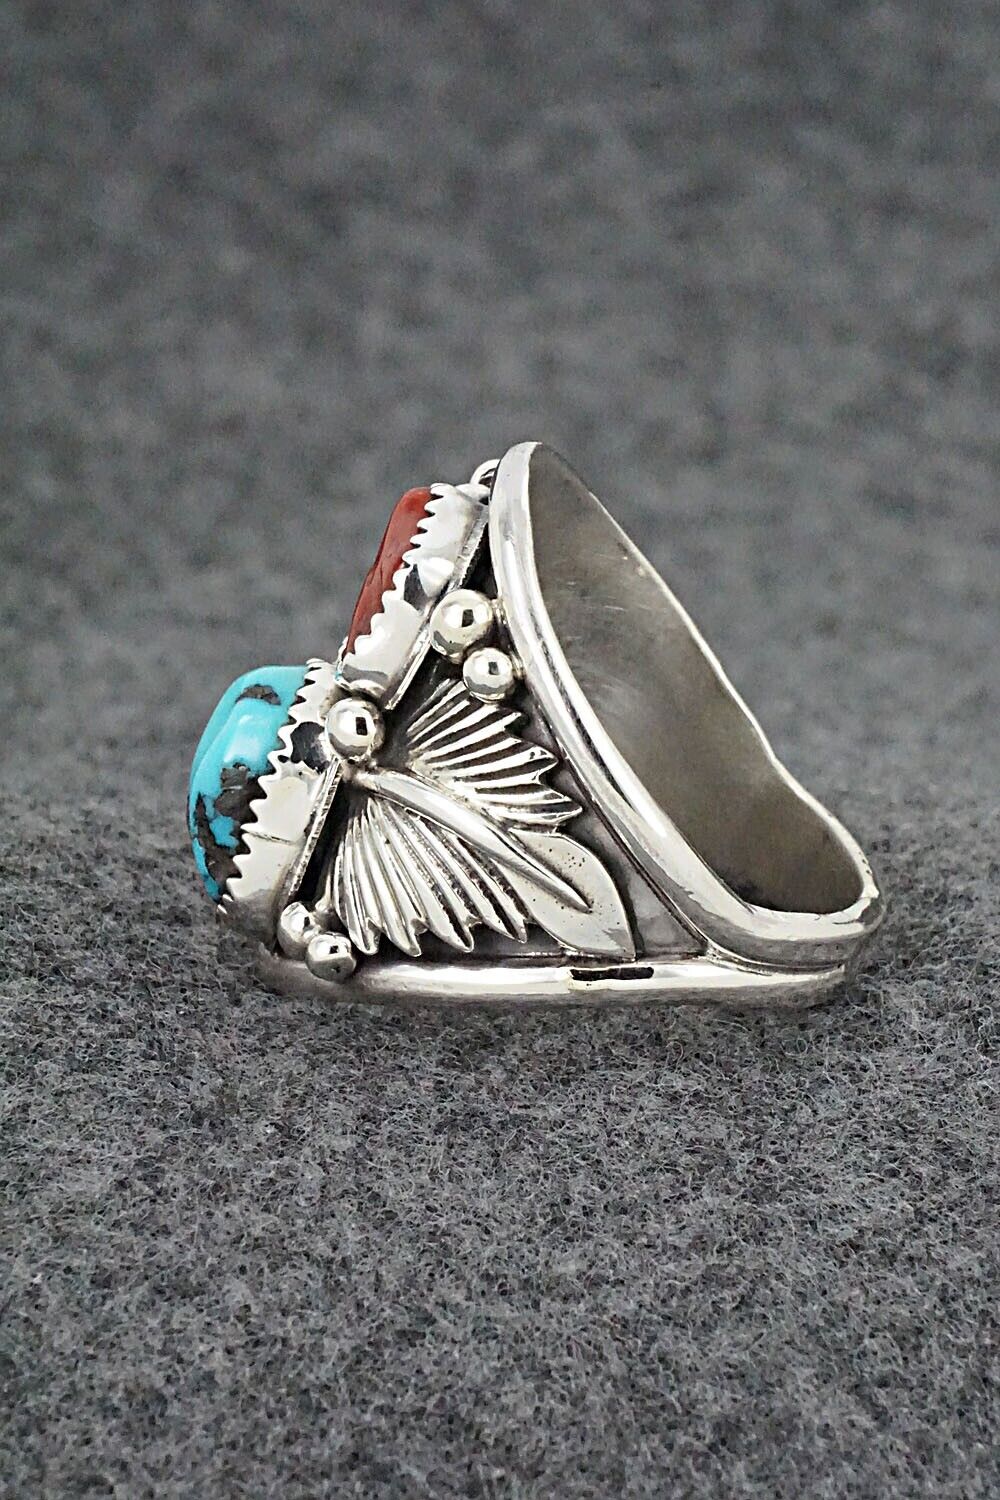 Turquoise, Coral & Sterling Silver Ring - Jeannette Saunders - Size 13.25